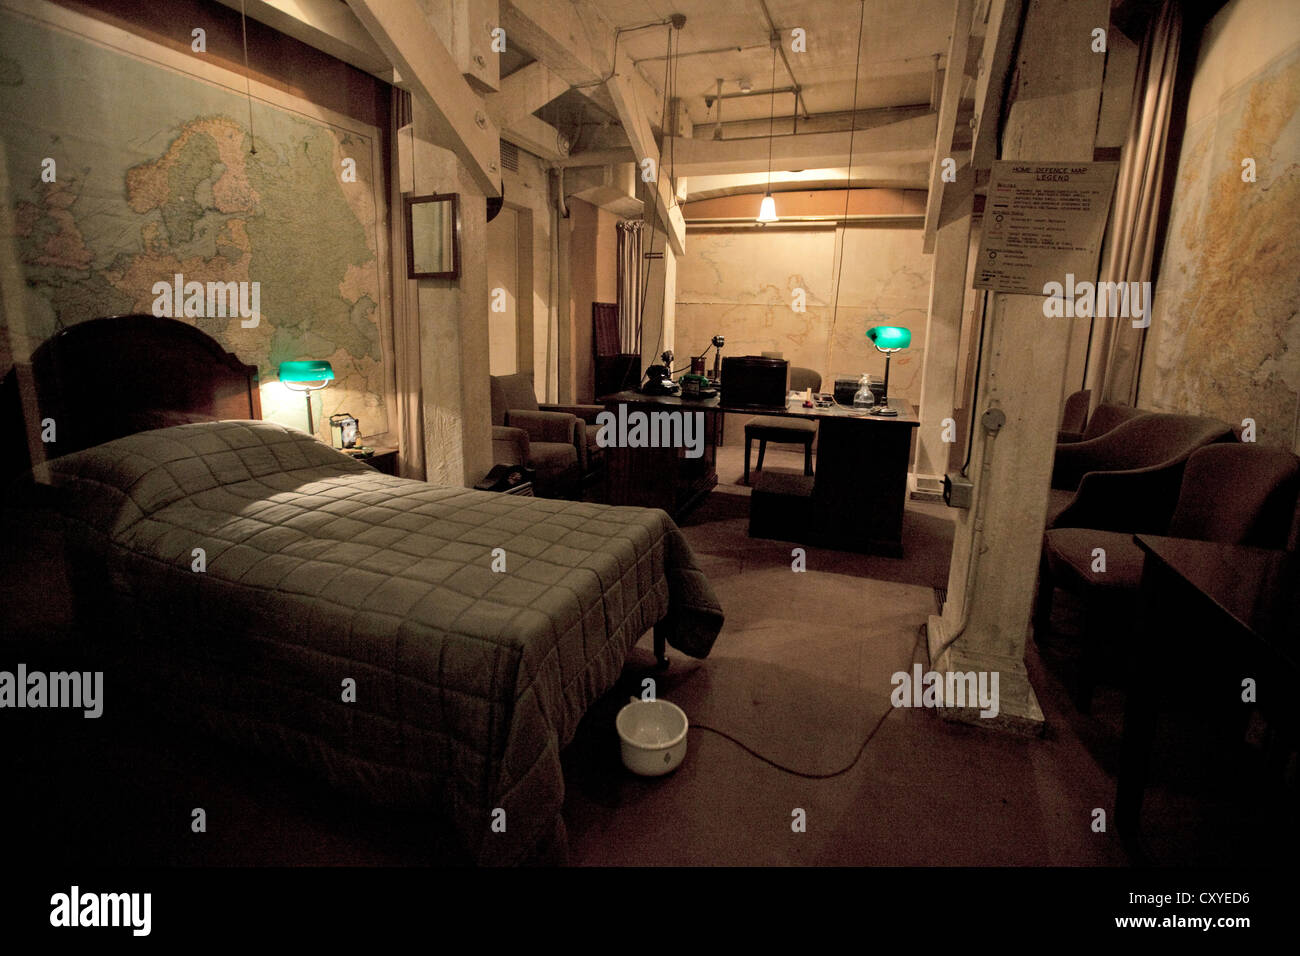 winston churchill's sleeping quarters in the underground bunker at whitehall, churchill's war rooms, cabinet war rooms. Stock Photo